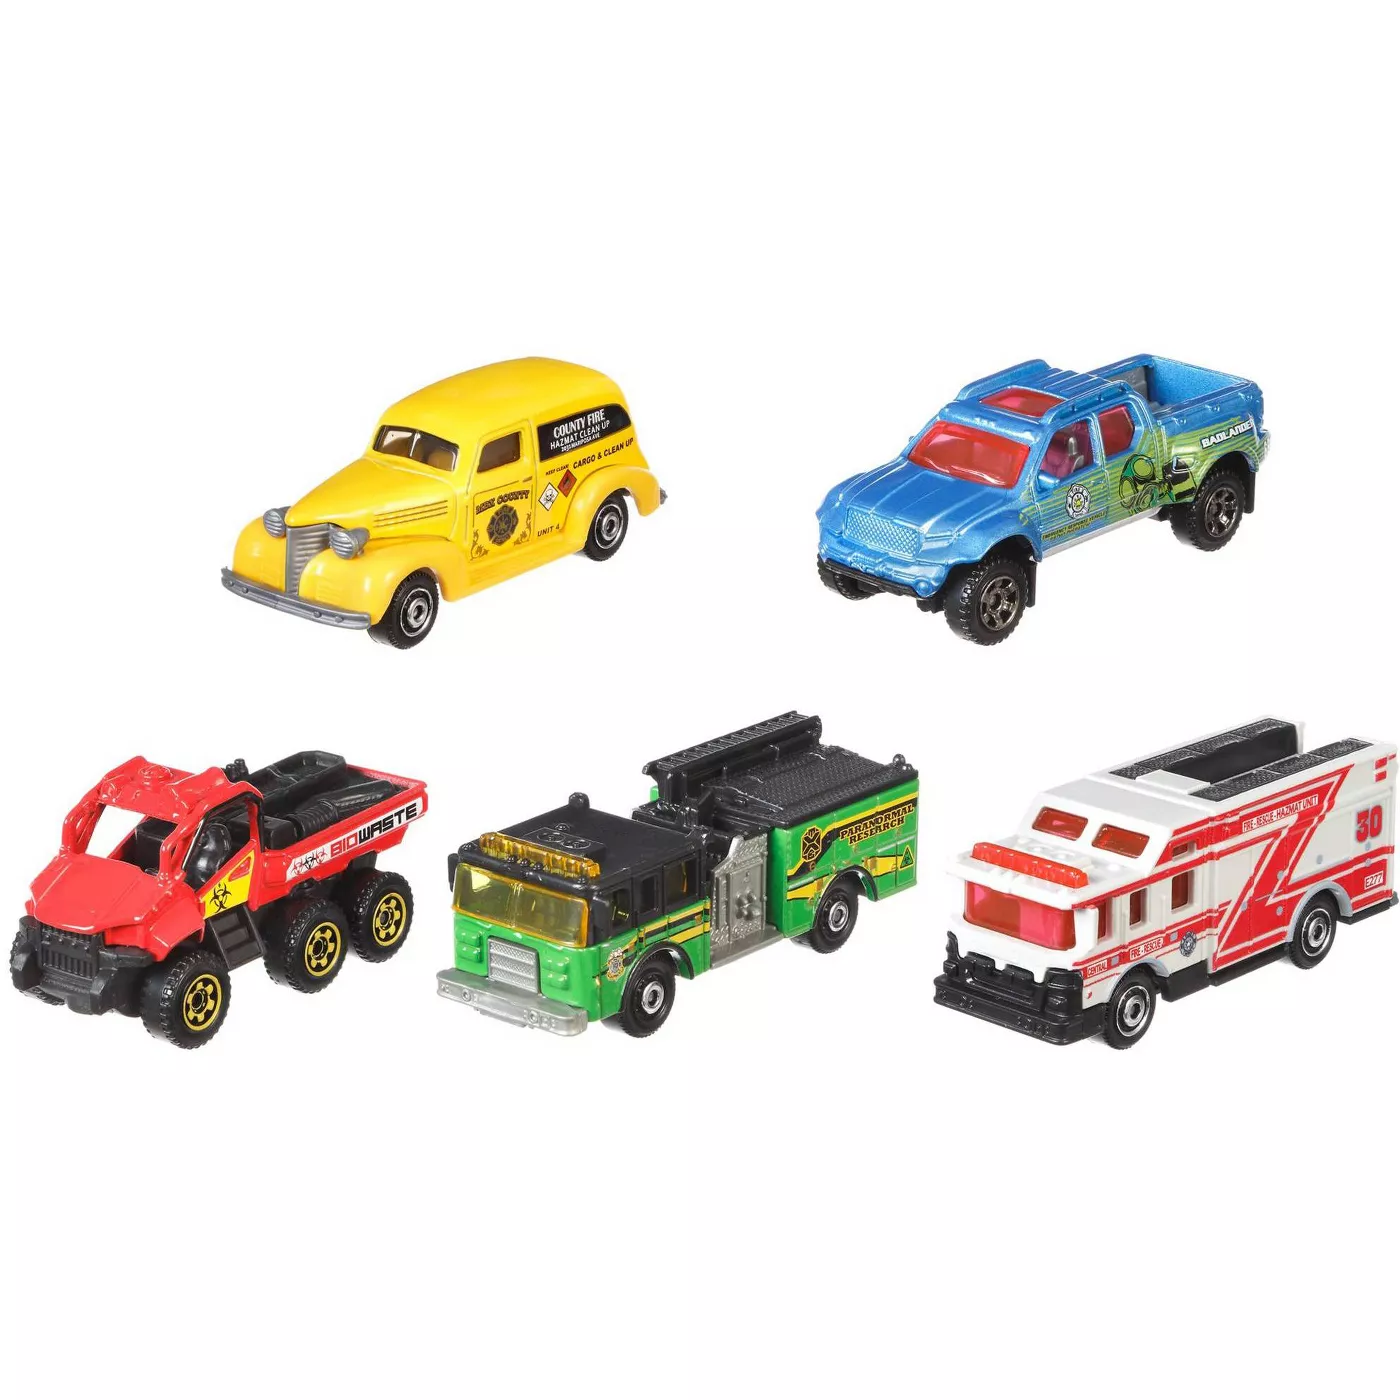 Matchbox 5 Car Pack - Styles may vary - image 1 of 6